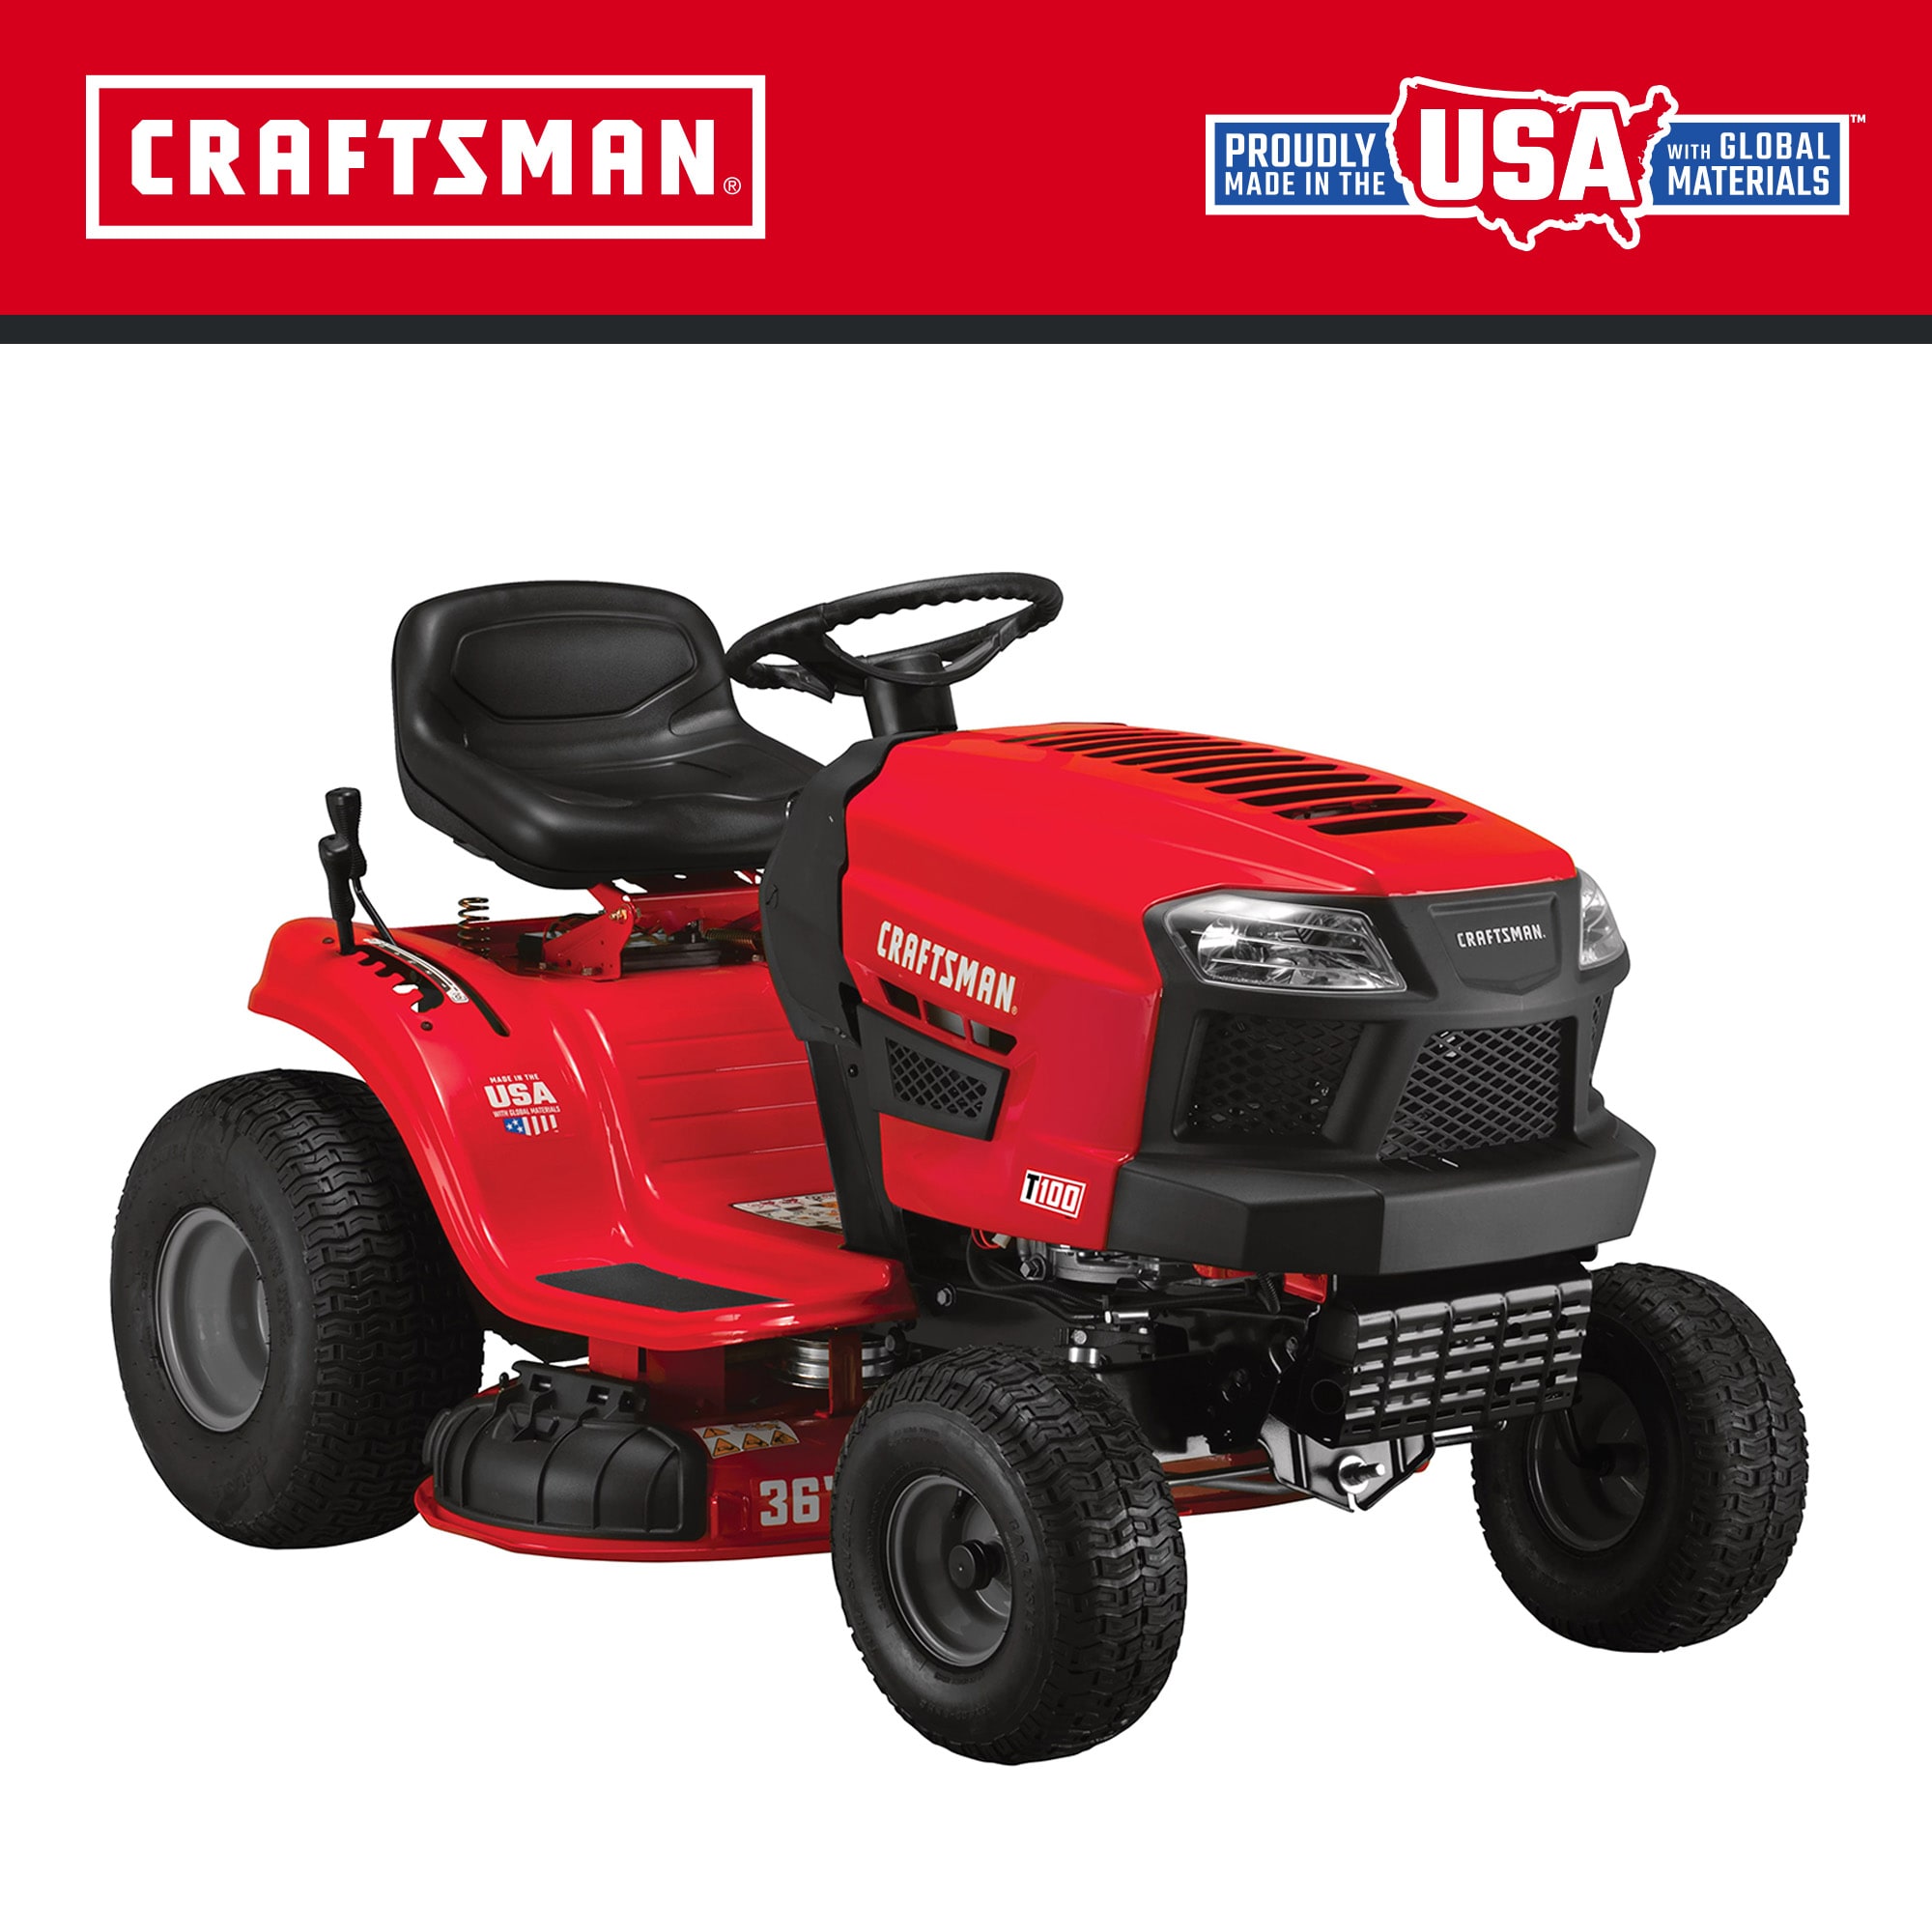 CRAFTSMAN T100 36-in 11.5-HP Gas Riding Lawn Mower